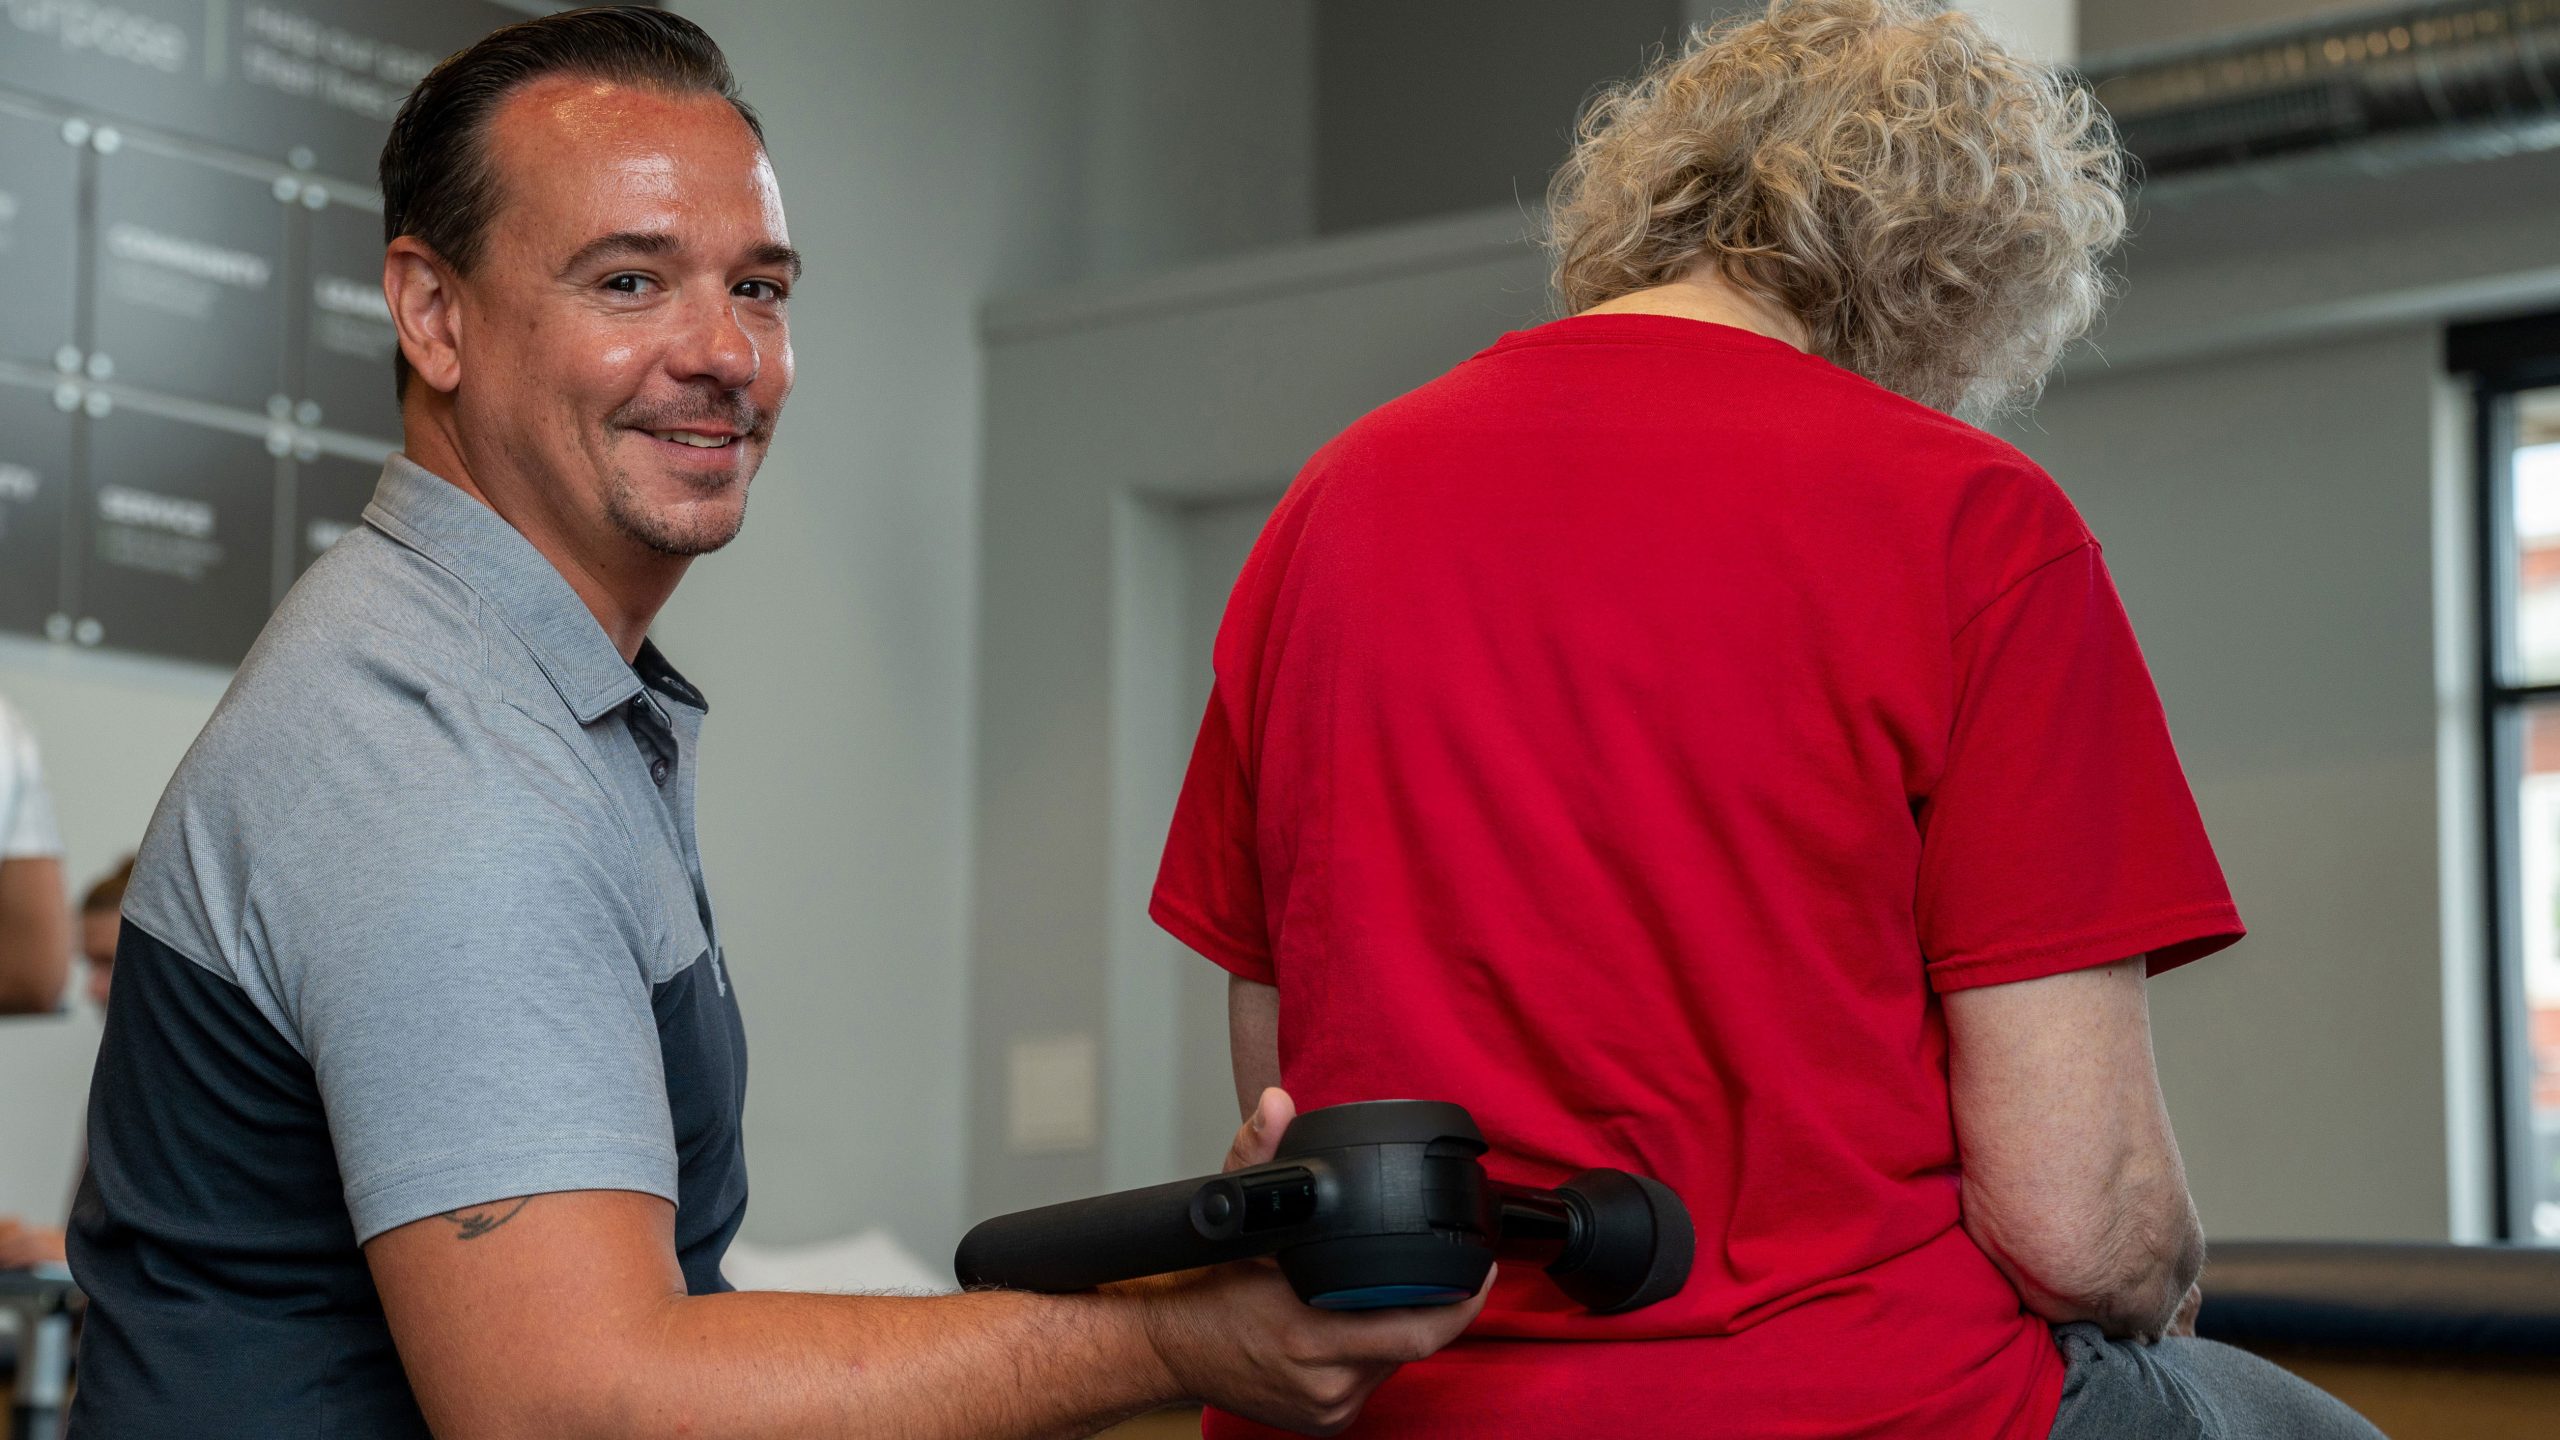 A Physical Therapist smiles at the camera as he uses a massage gun on his patient.